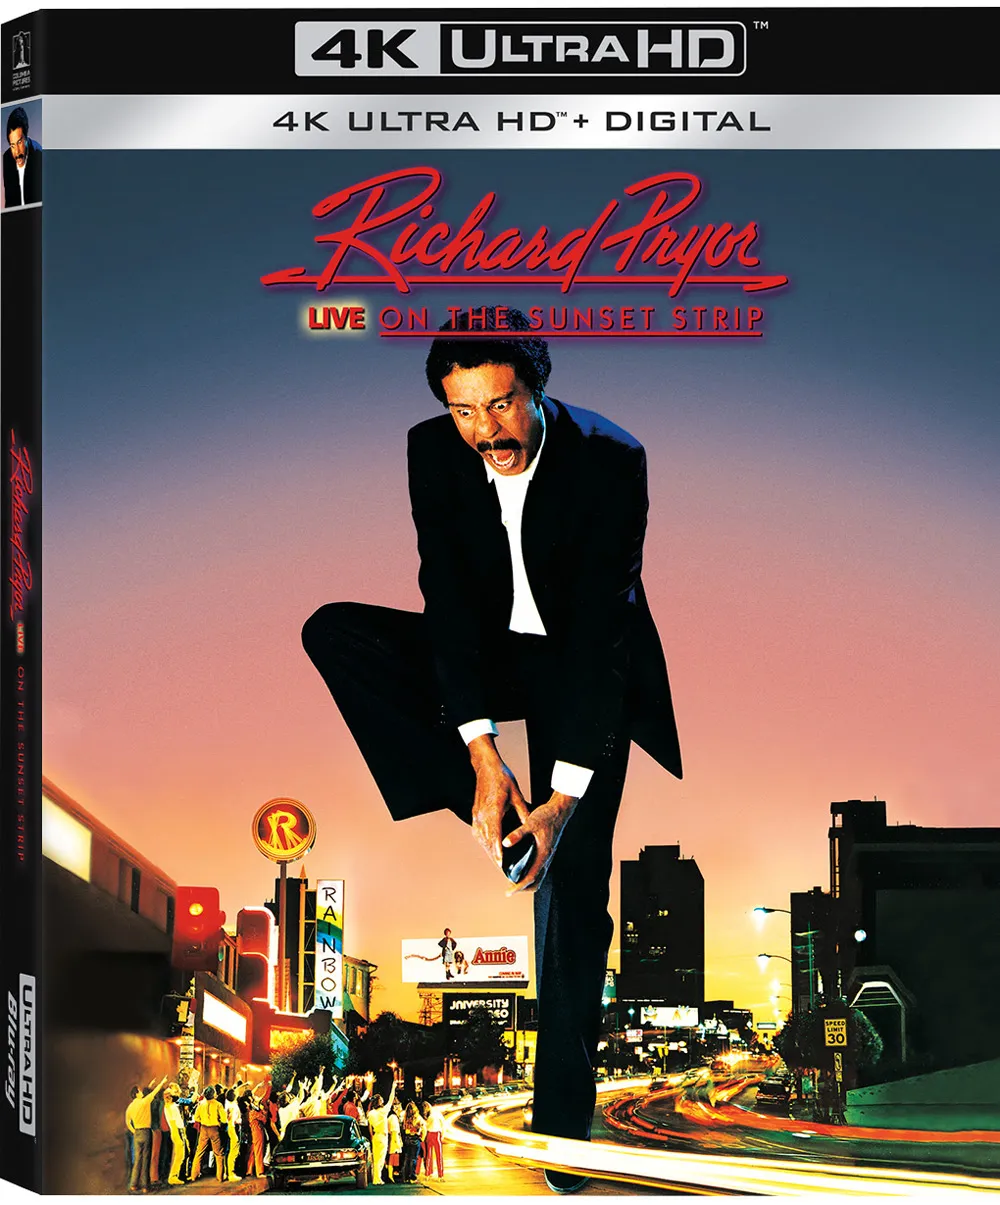 'Richard Pryor: Live on the Sunset Strip' Getting Surprise 4K Blu-ray Release